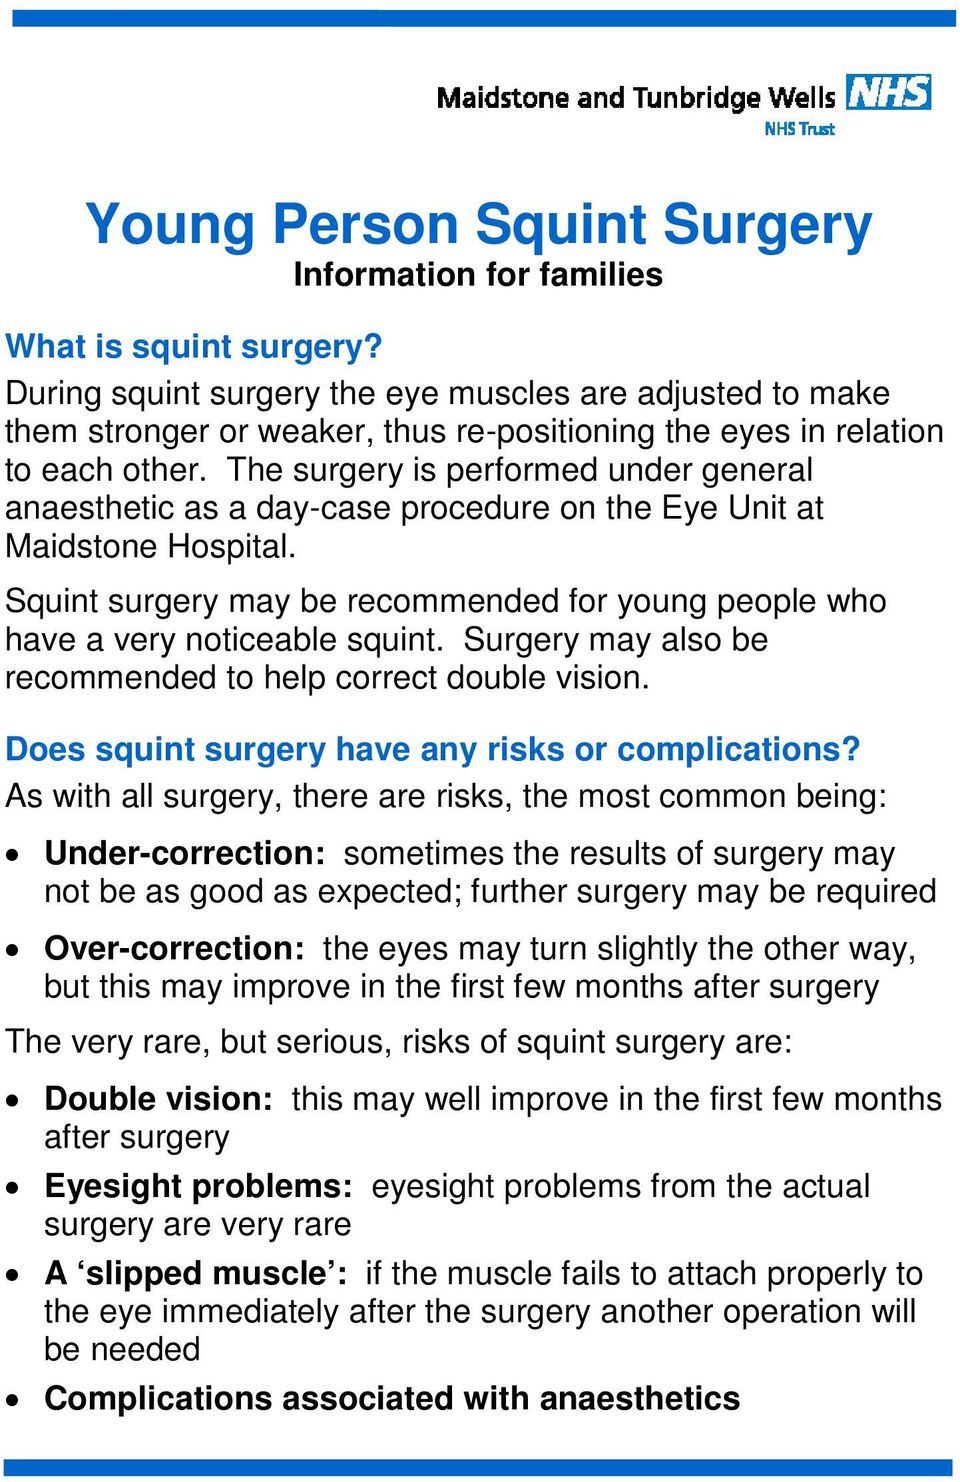 The surgery is performed under general anaesthetic as a day-case procedure on the Eye Unit at Maidstone Hospital. Squint surgery may be recommended for young people who have a very noticeable squint.